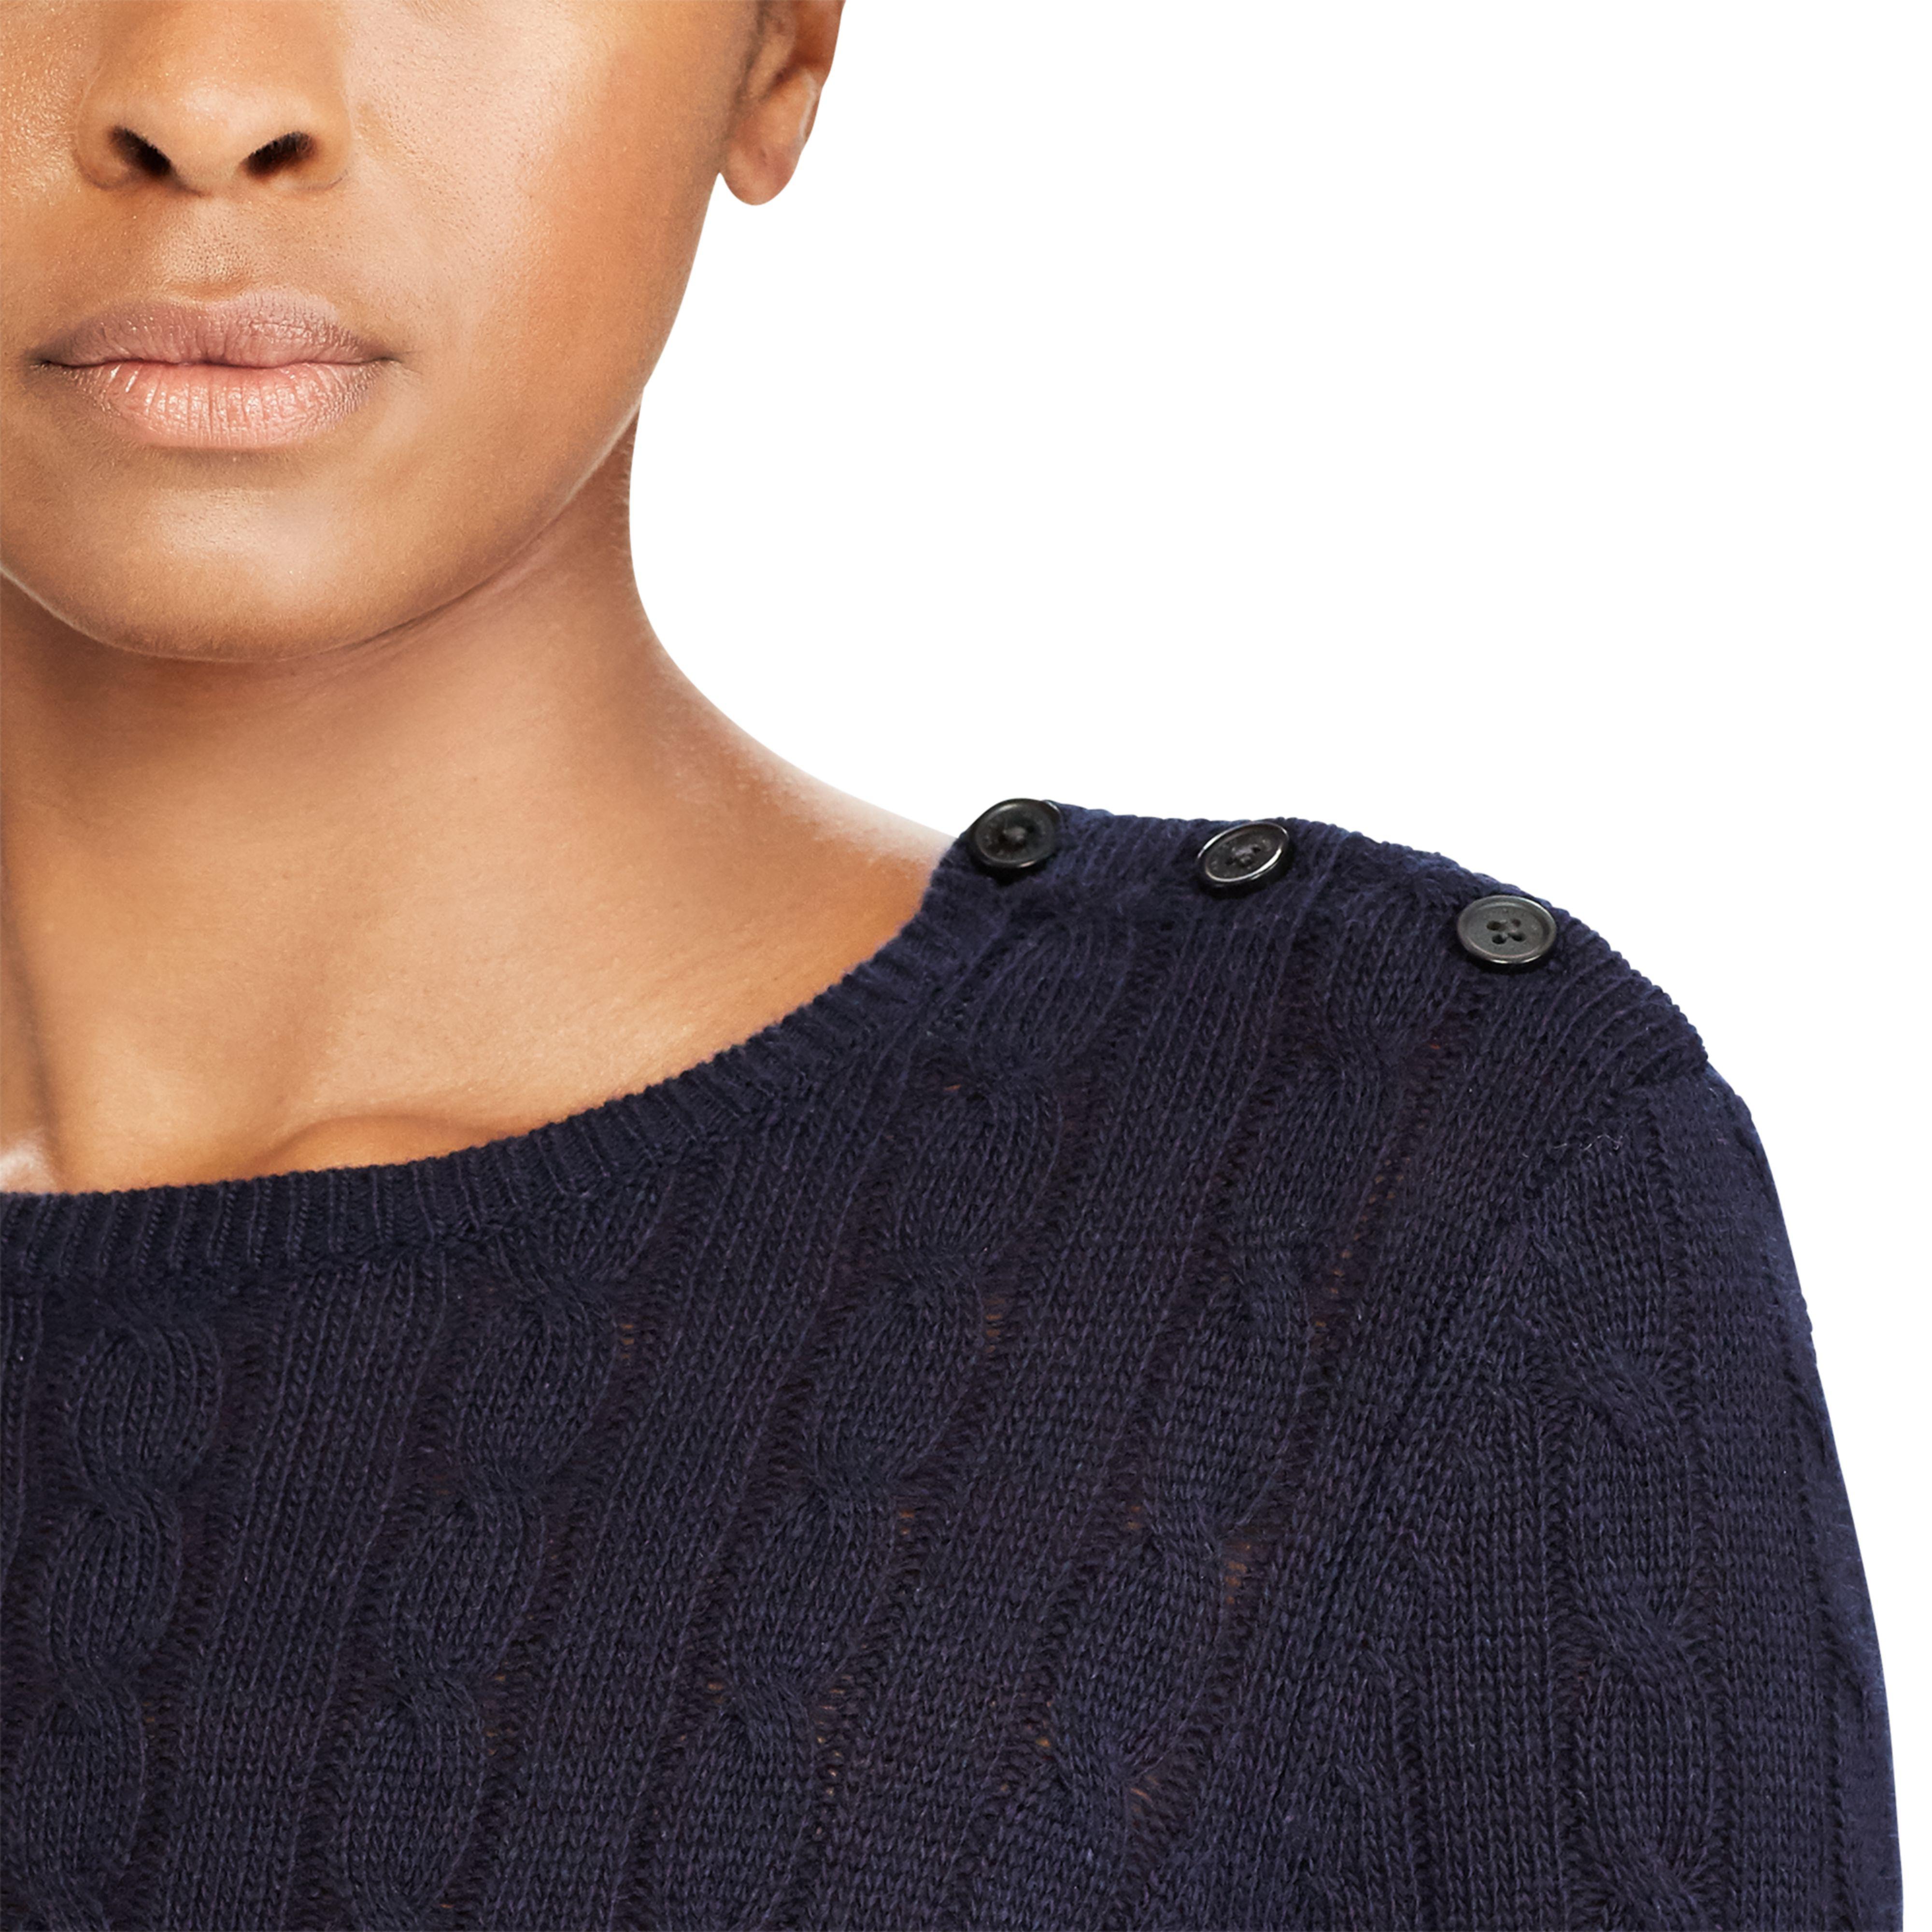 Ralph Lauren Synthetic Cable-knit Sweater Dress in rl Navy (Blue) - Lyst